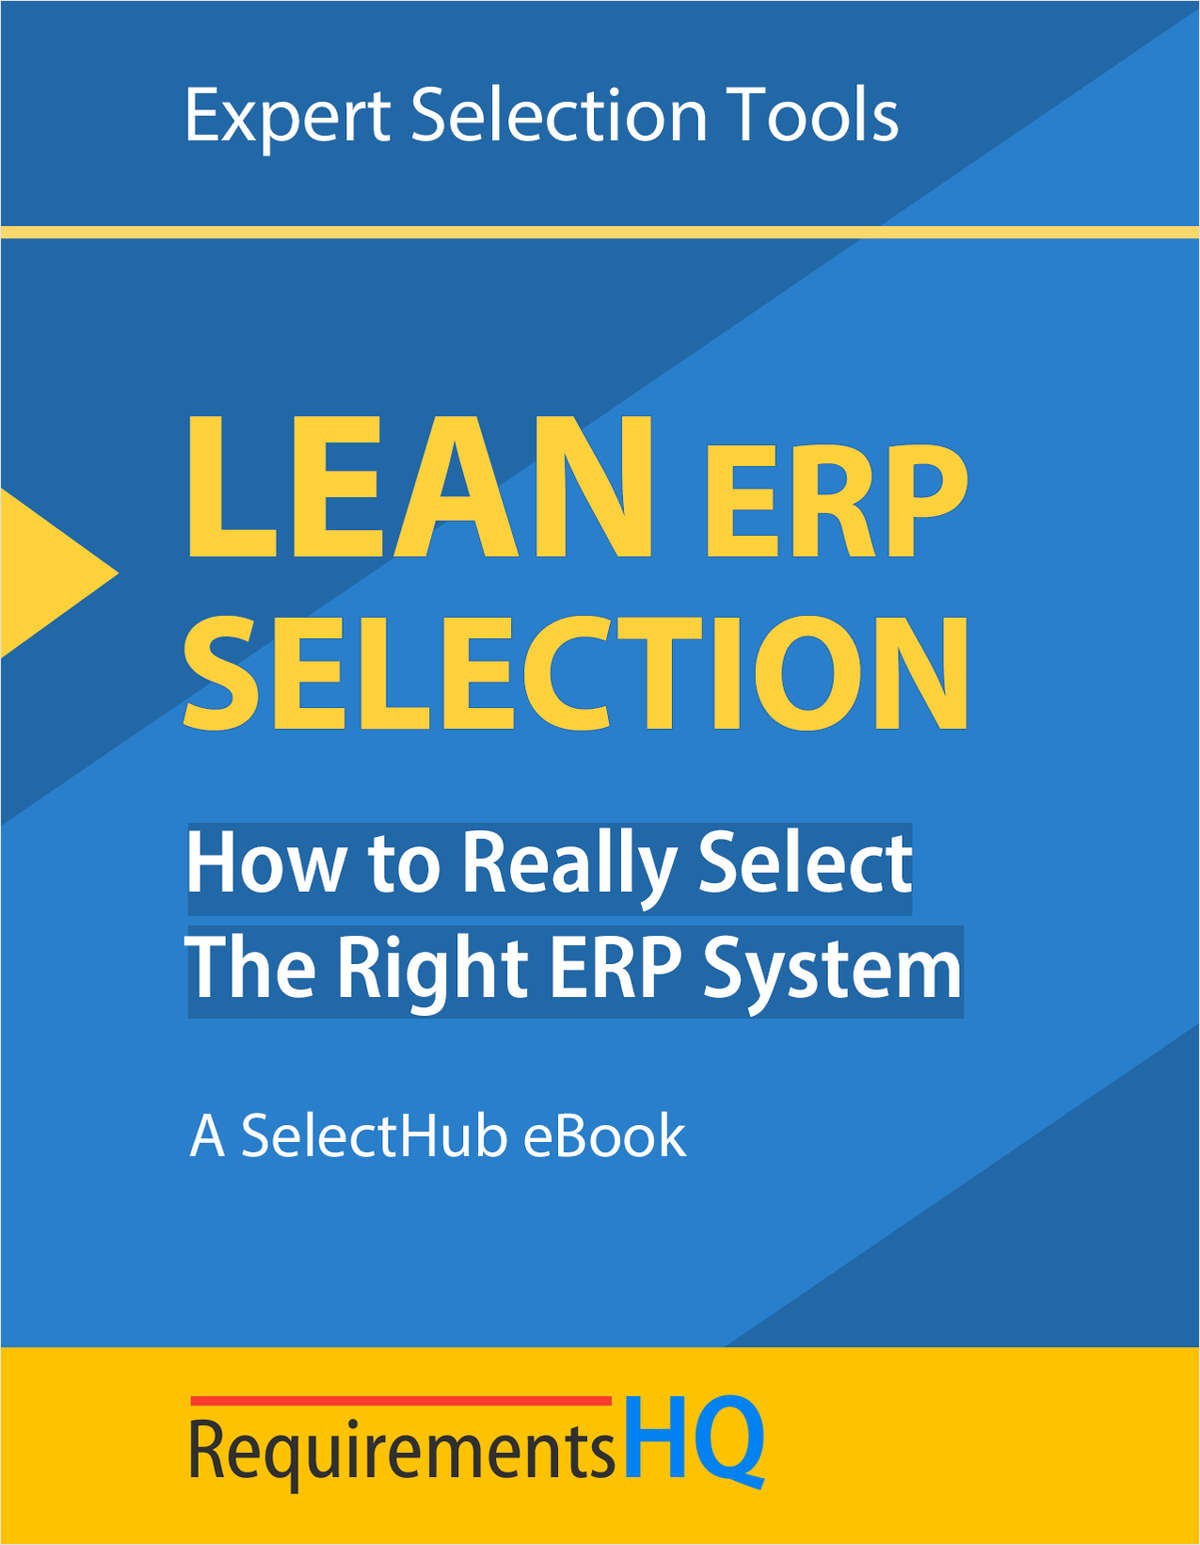 Lean ERP Selection: How to Really Select the Right ERP System